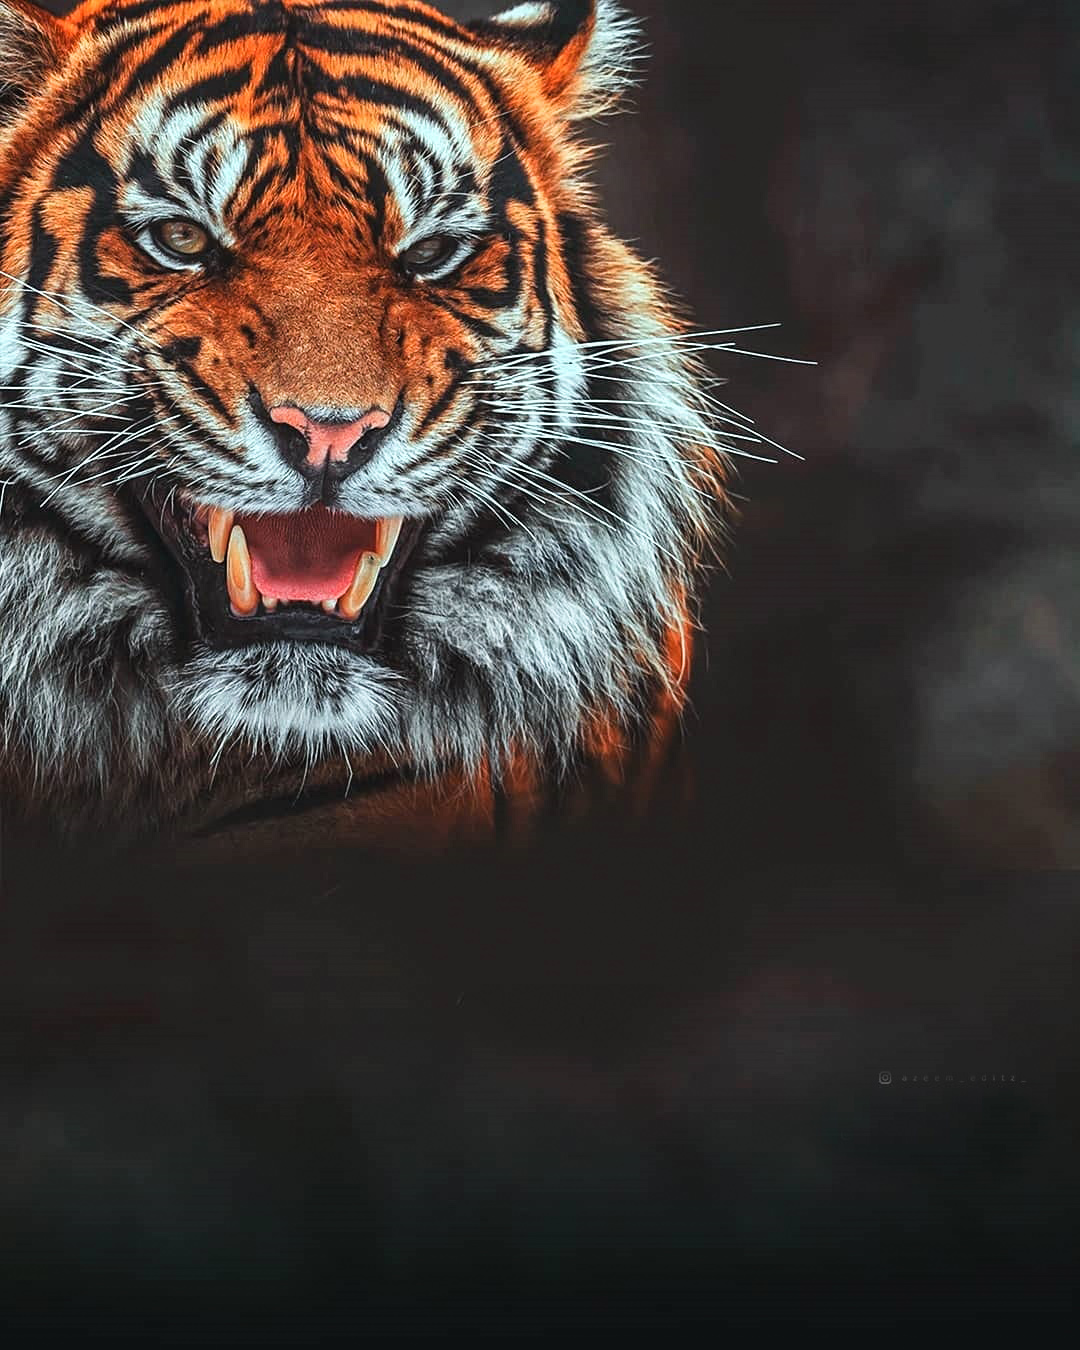  Tiger Face Photo Editing Background Full HD Download | CBEditz